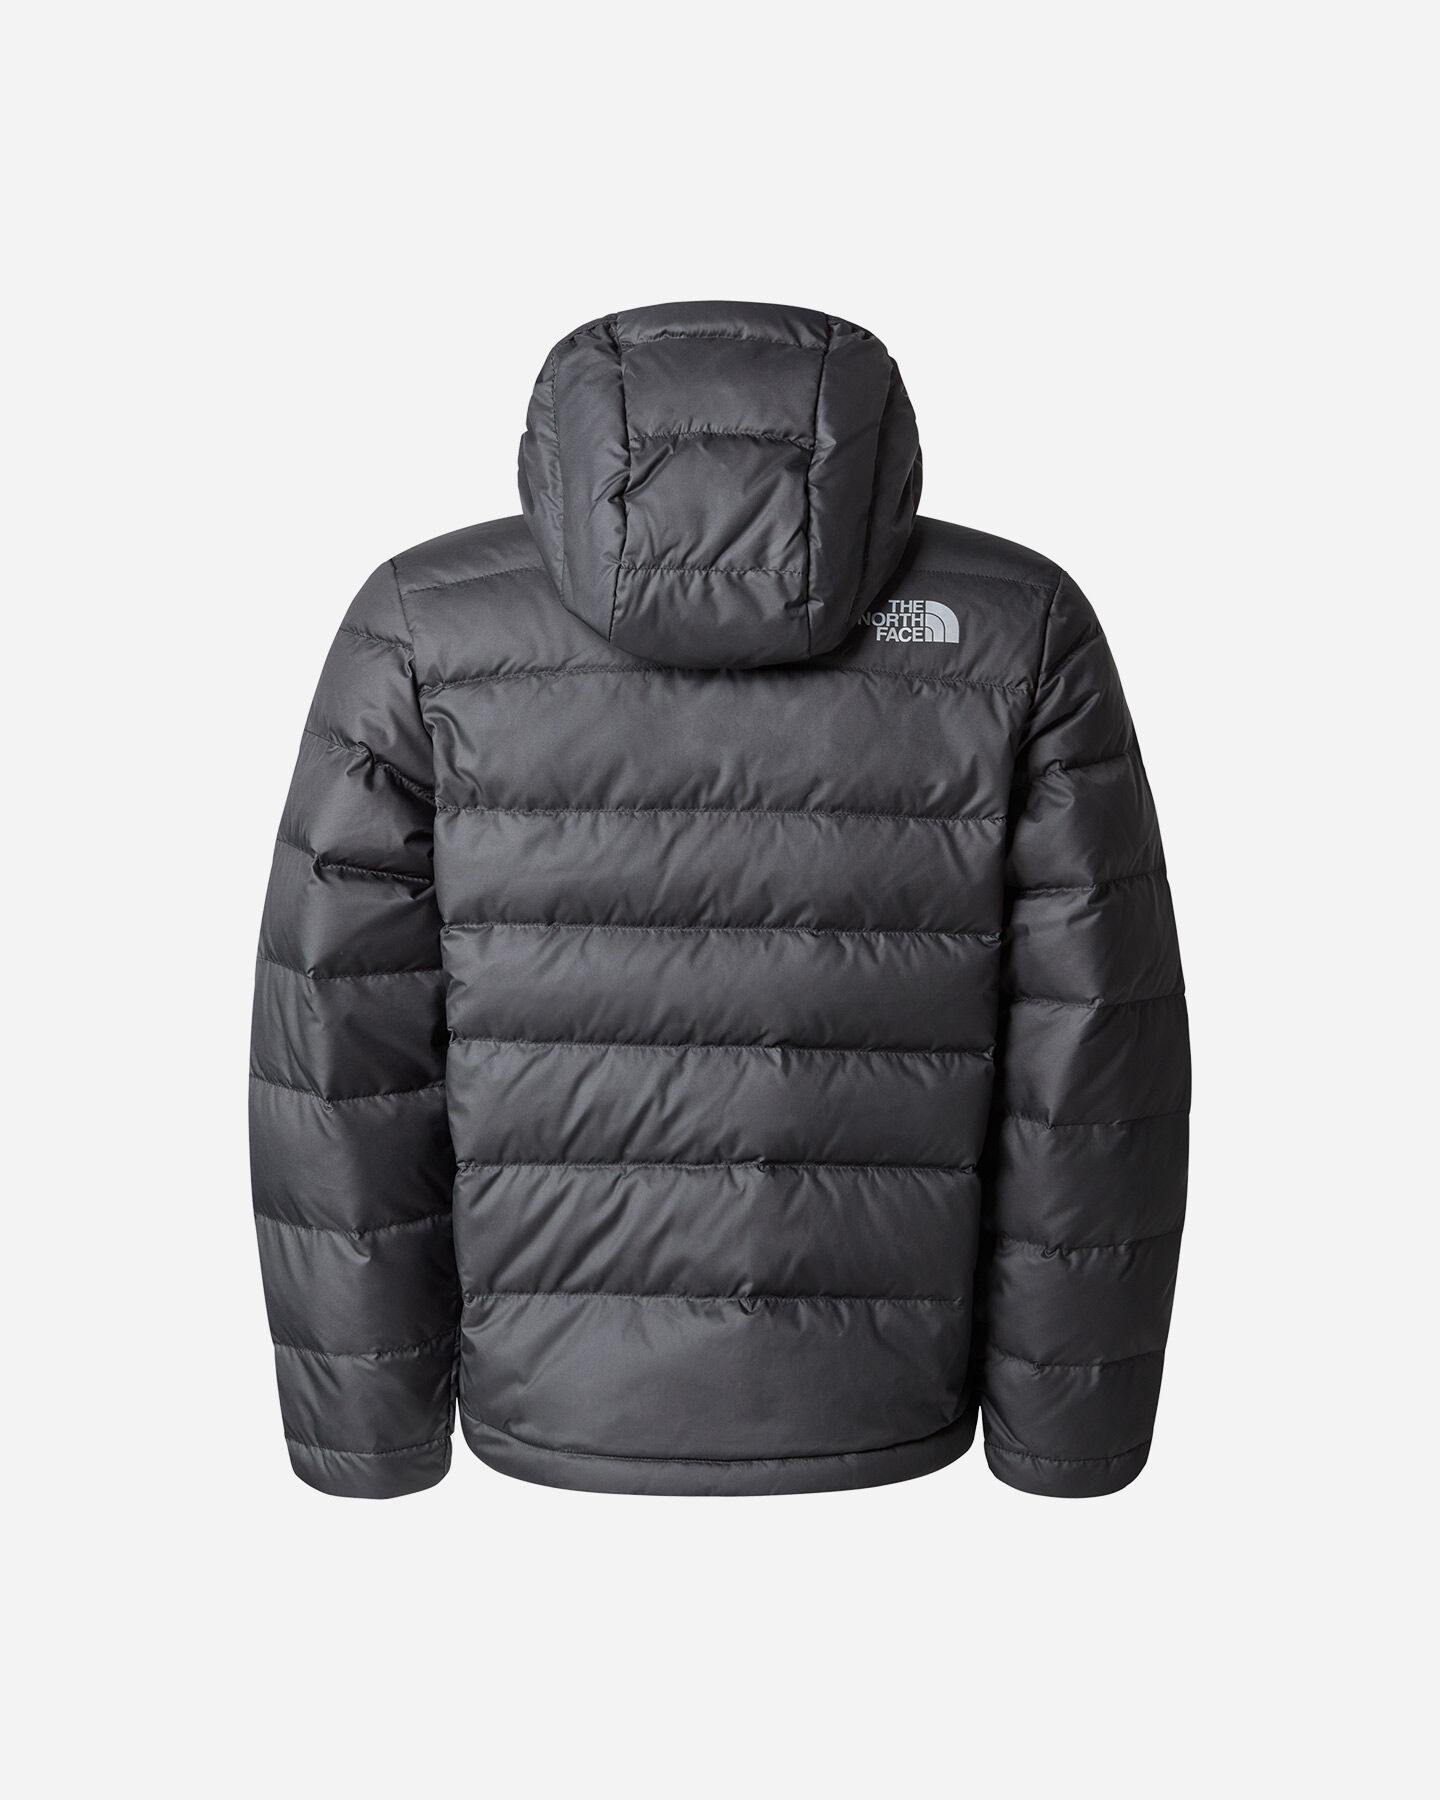  Giubbotto THE NORTH FACE NEVER STOP JR S5599277|JK3|M scatto 1